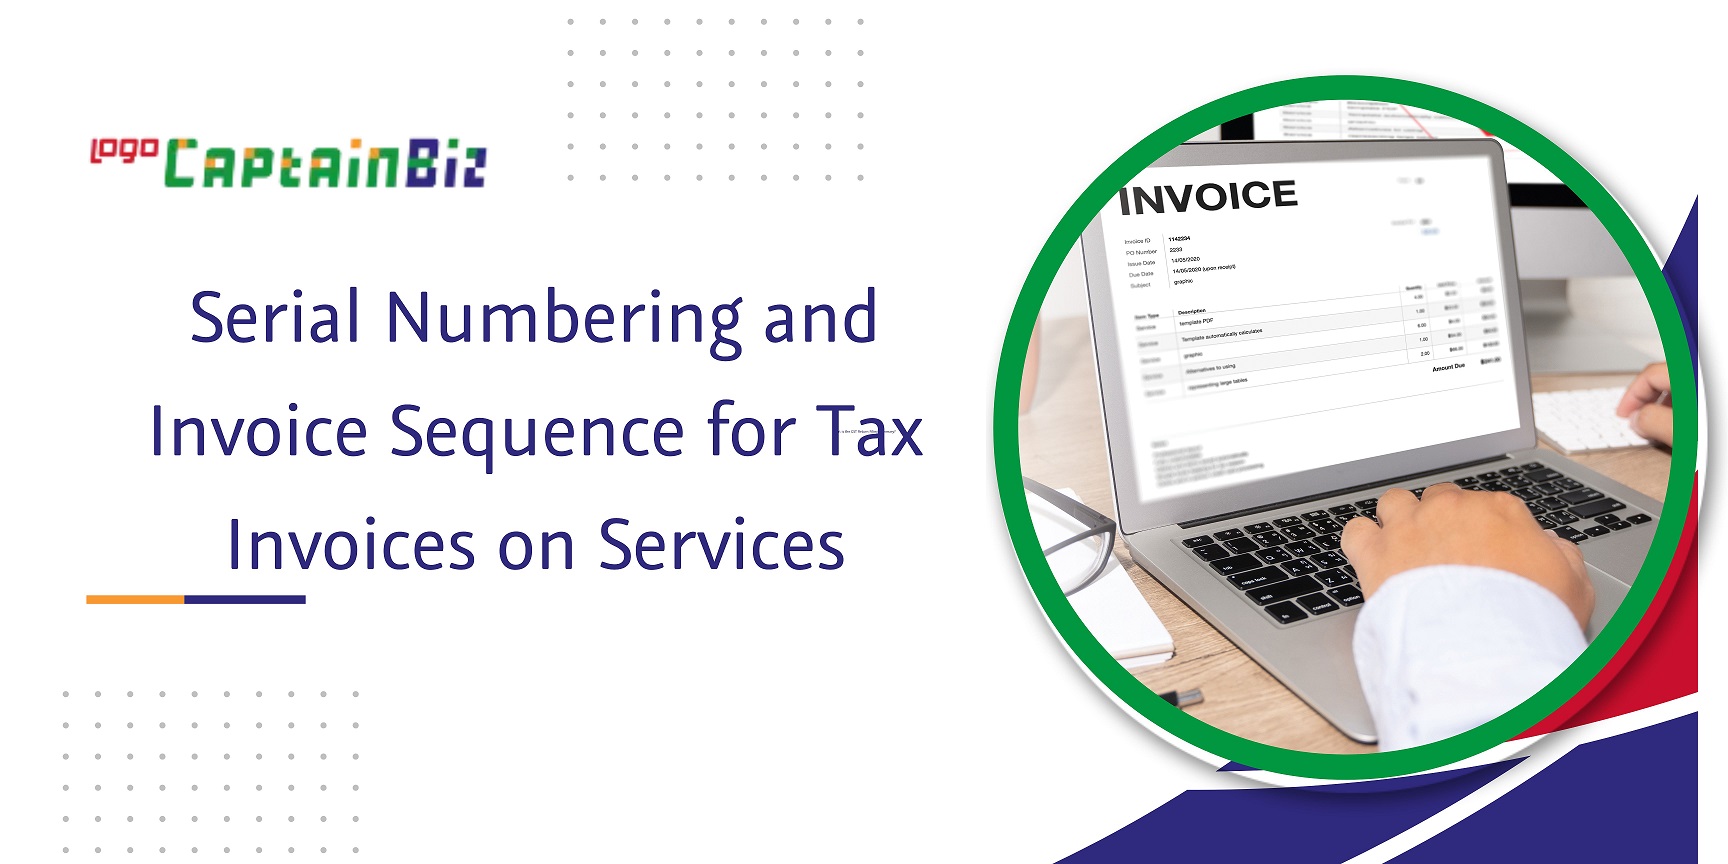 CaptainBiz: serial numbering and invoice sequence for tax invoices on services